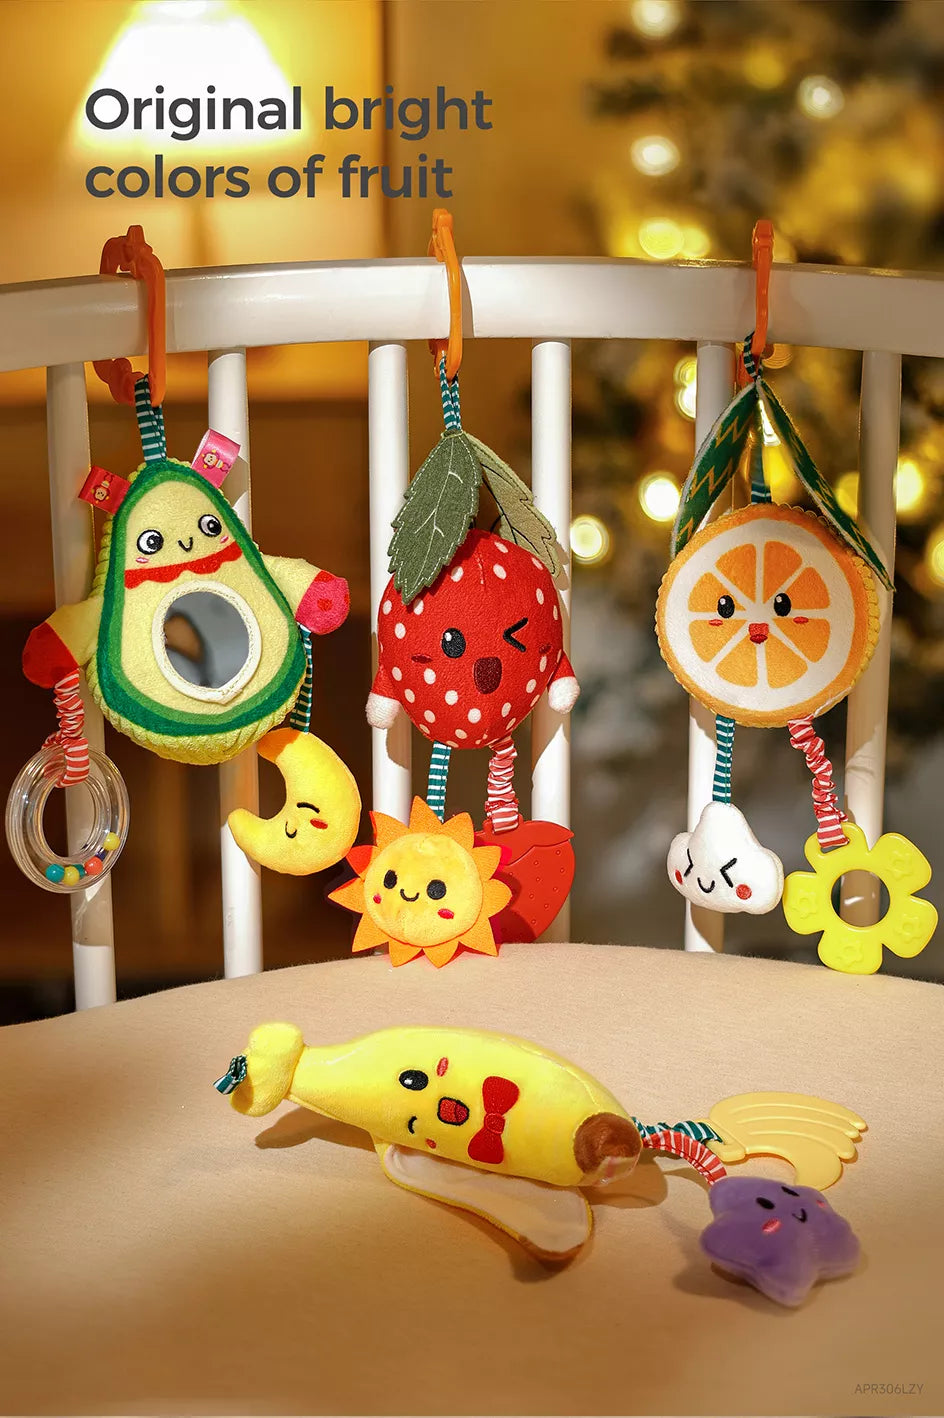 Baby toy hanging fruit rattle original bright colors of fruit